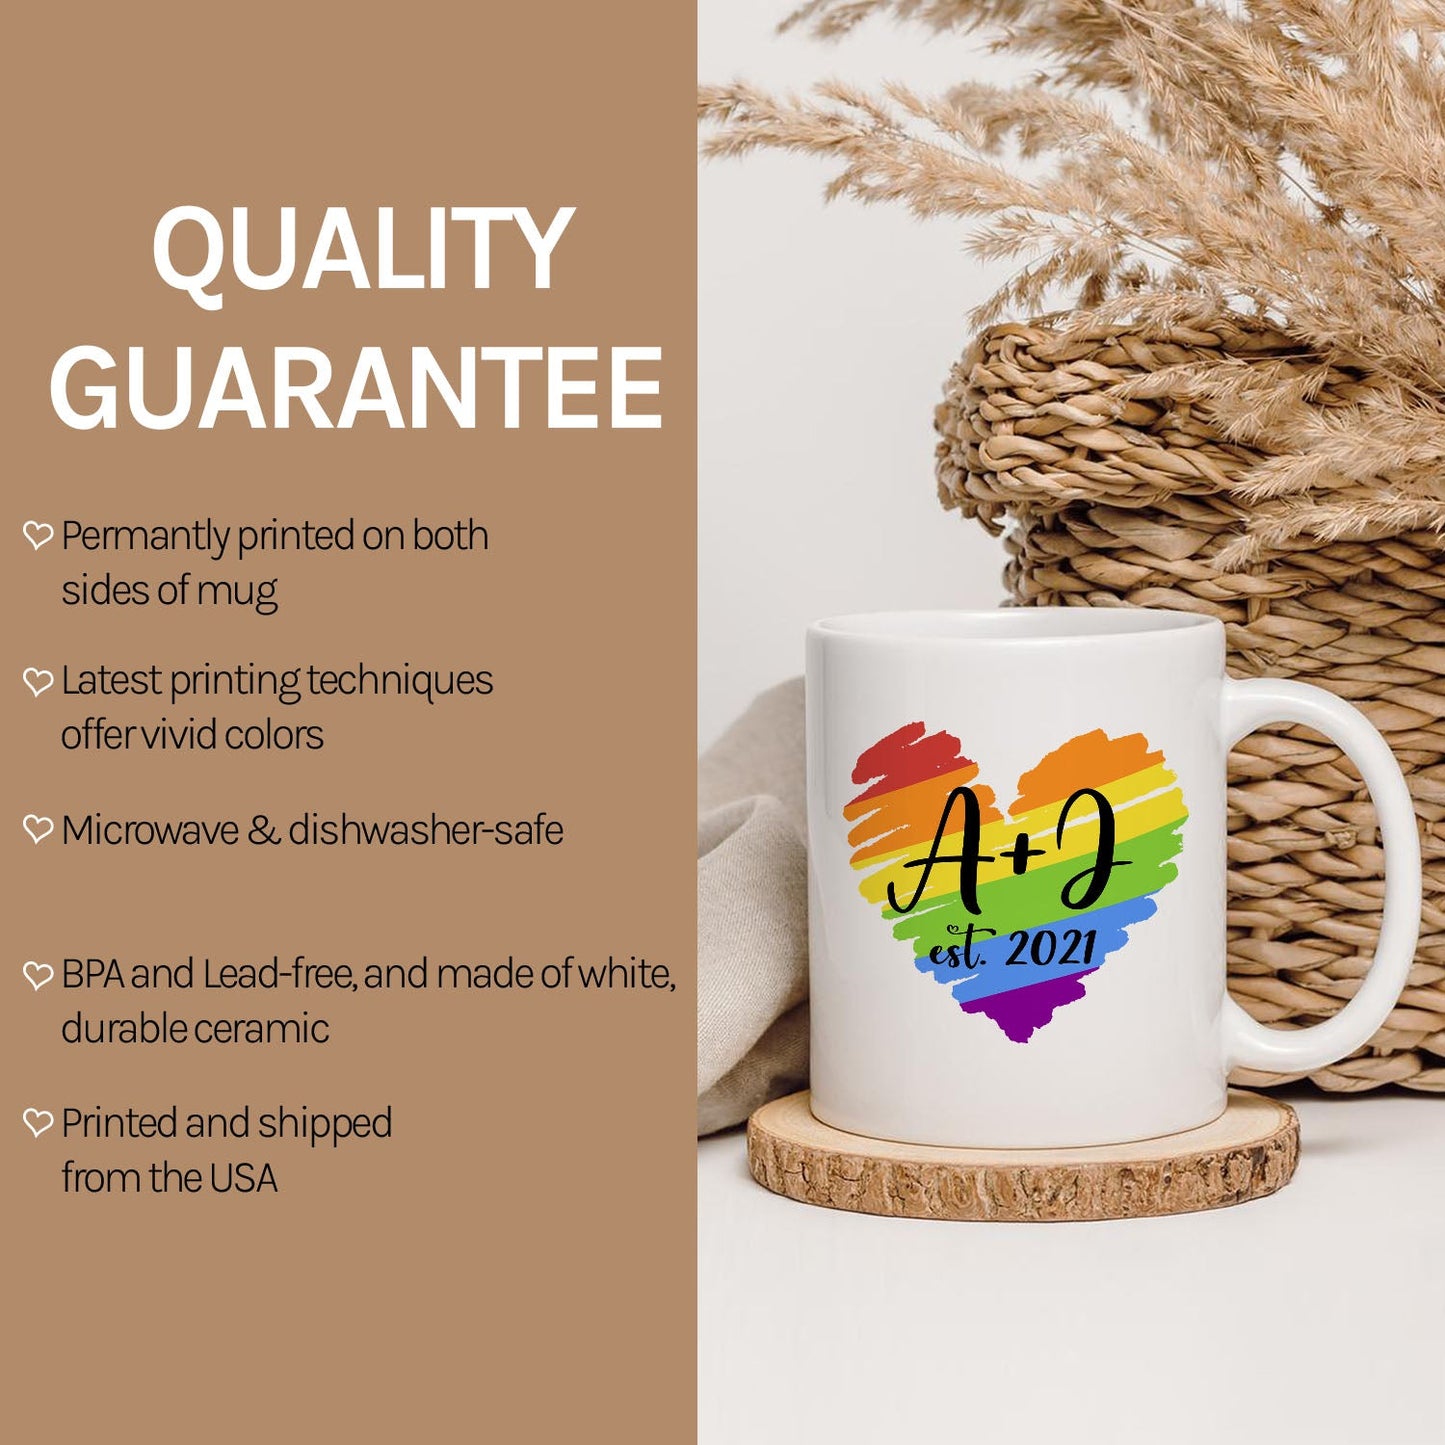 LGBT Love Heart - Personalized Anniversary, Valentine's Day gift for LGBT couple - Custom Mug - MyMindfulGifts